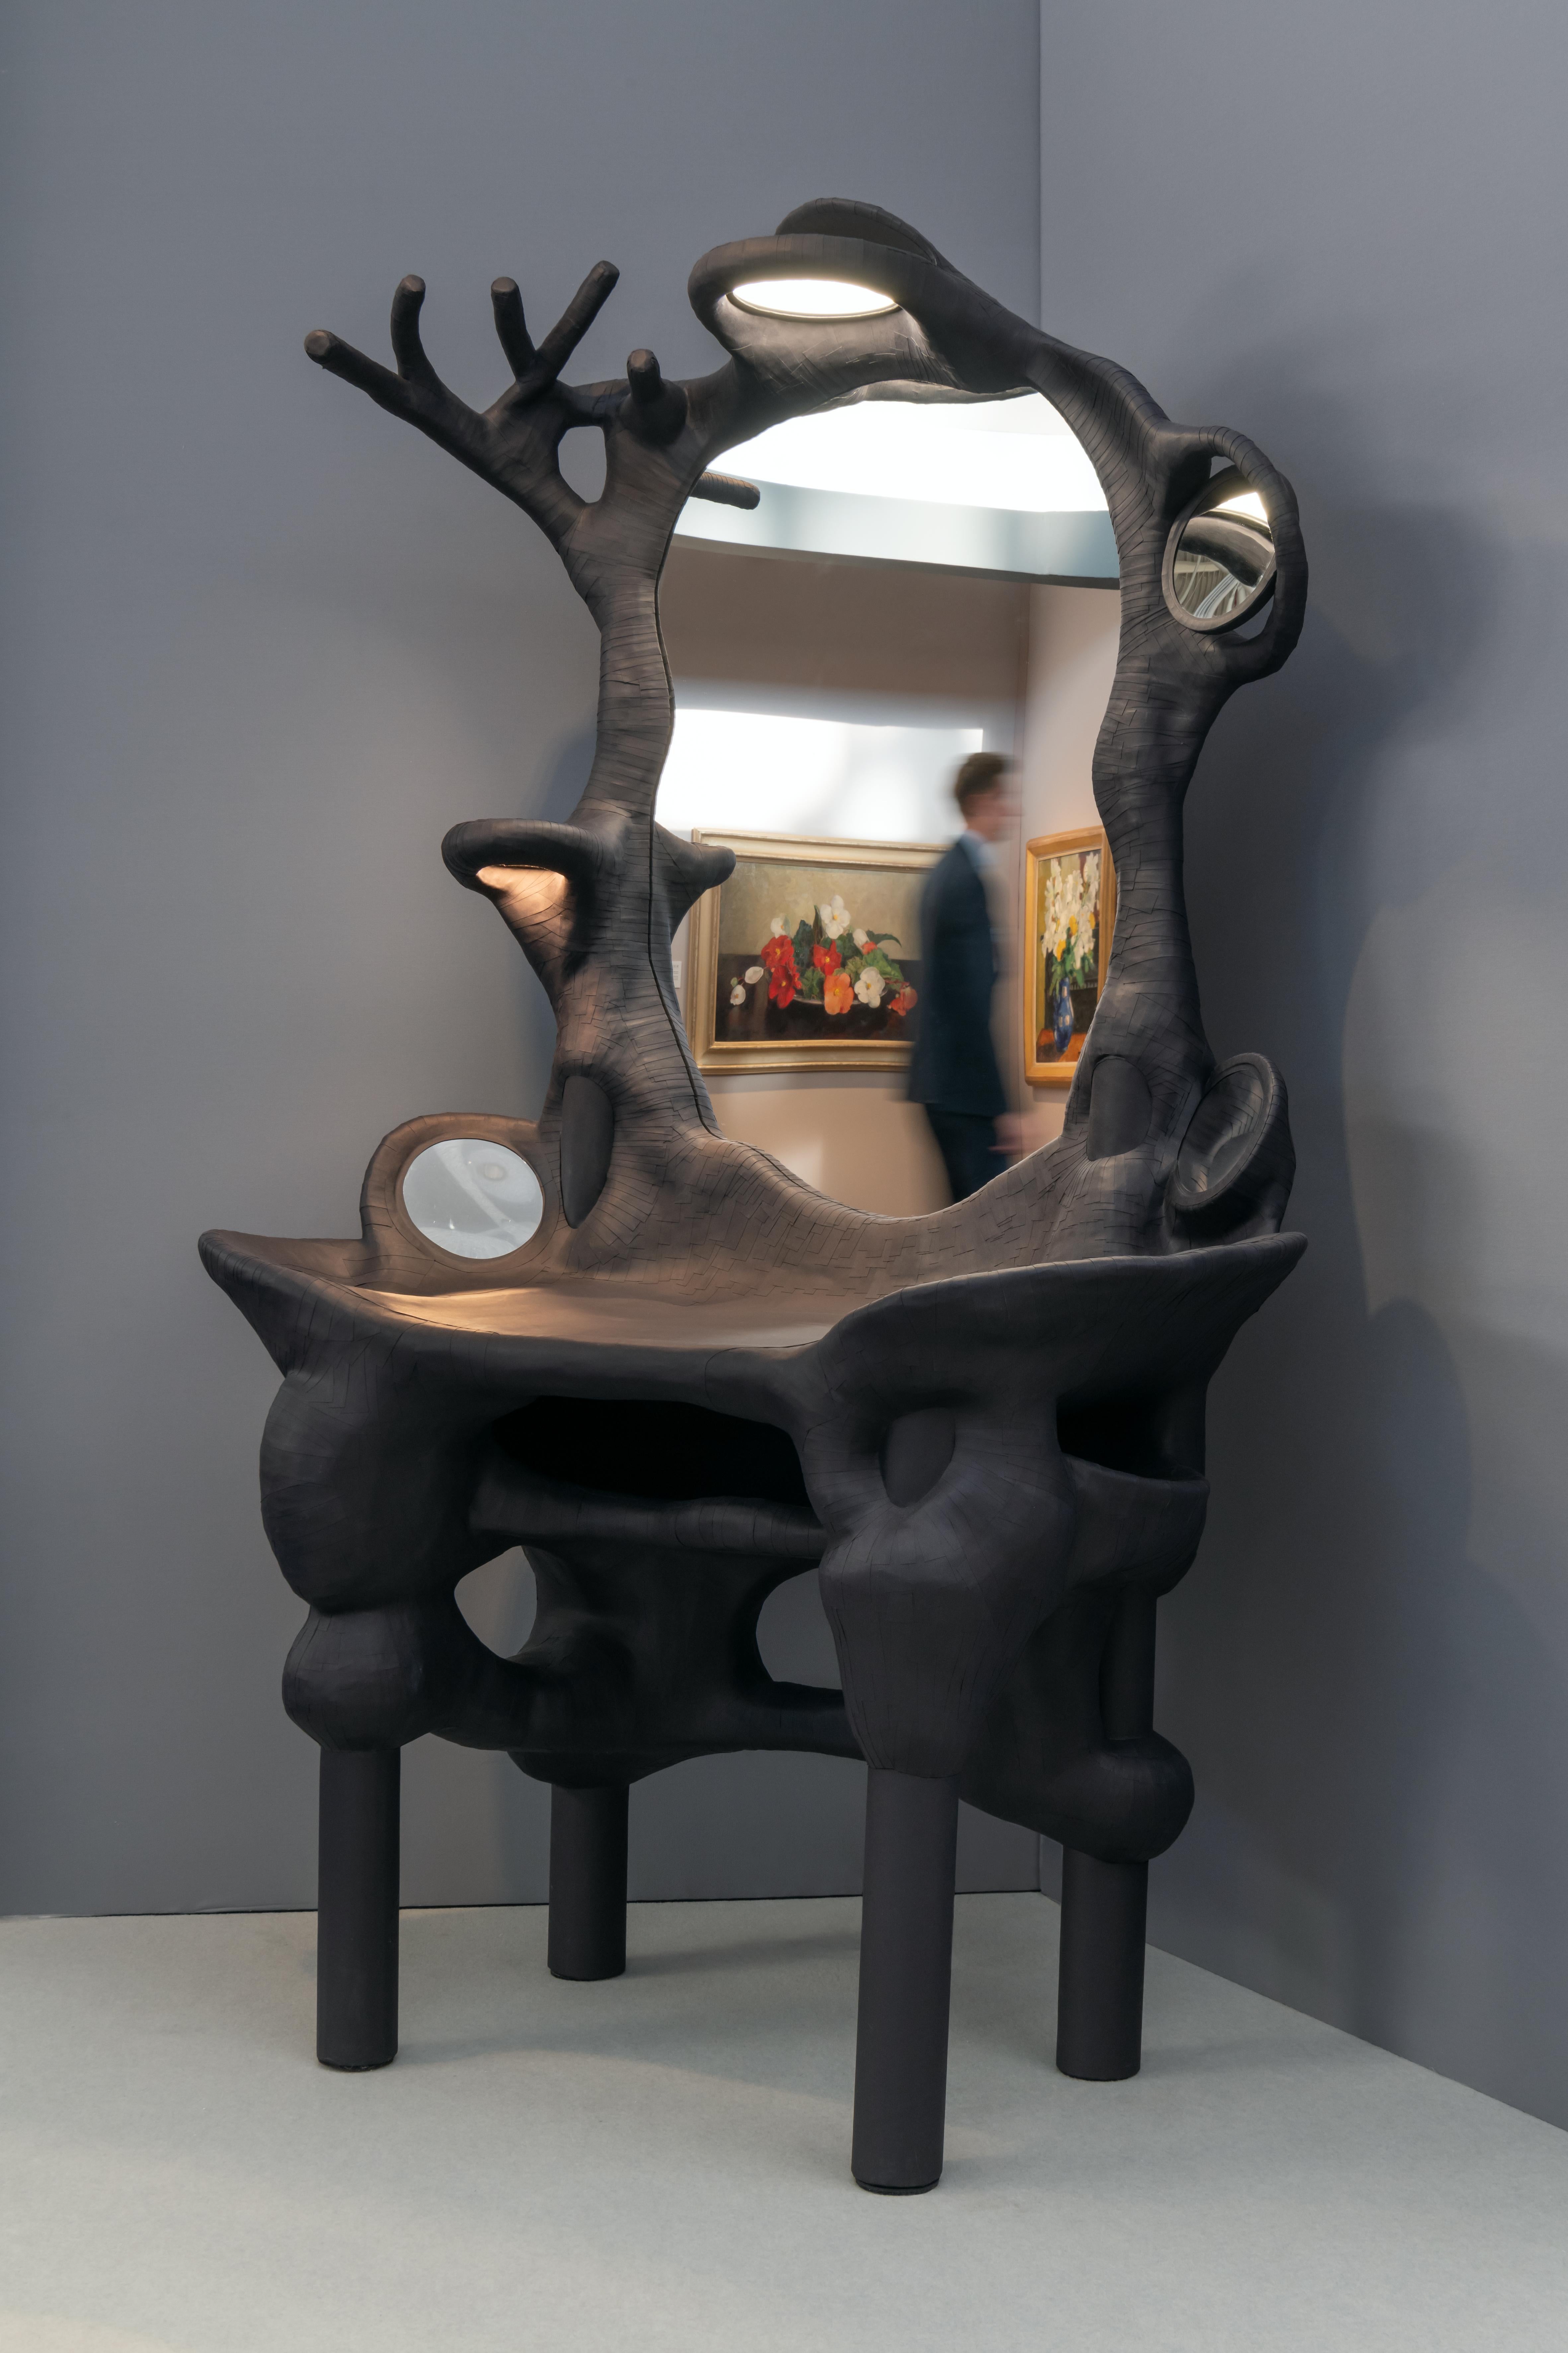 Collectible Design Vanity Table Black Mirror Coiffeuse by Vadim Kibardin In New Condition For Sale In Amsterdam, NL